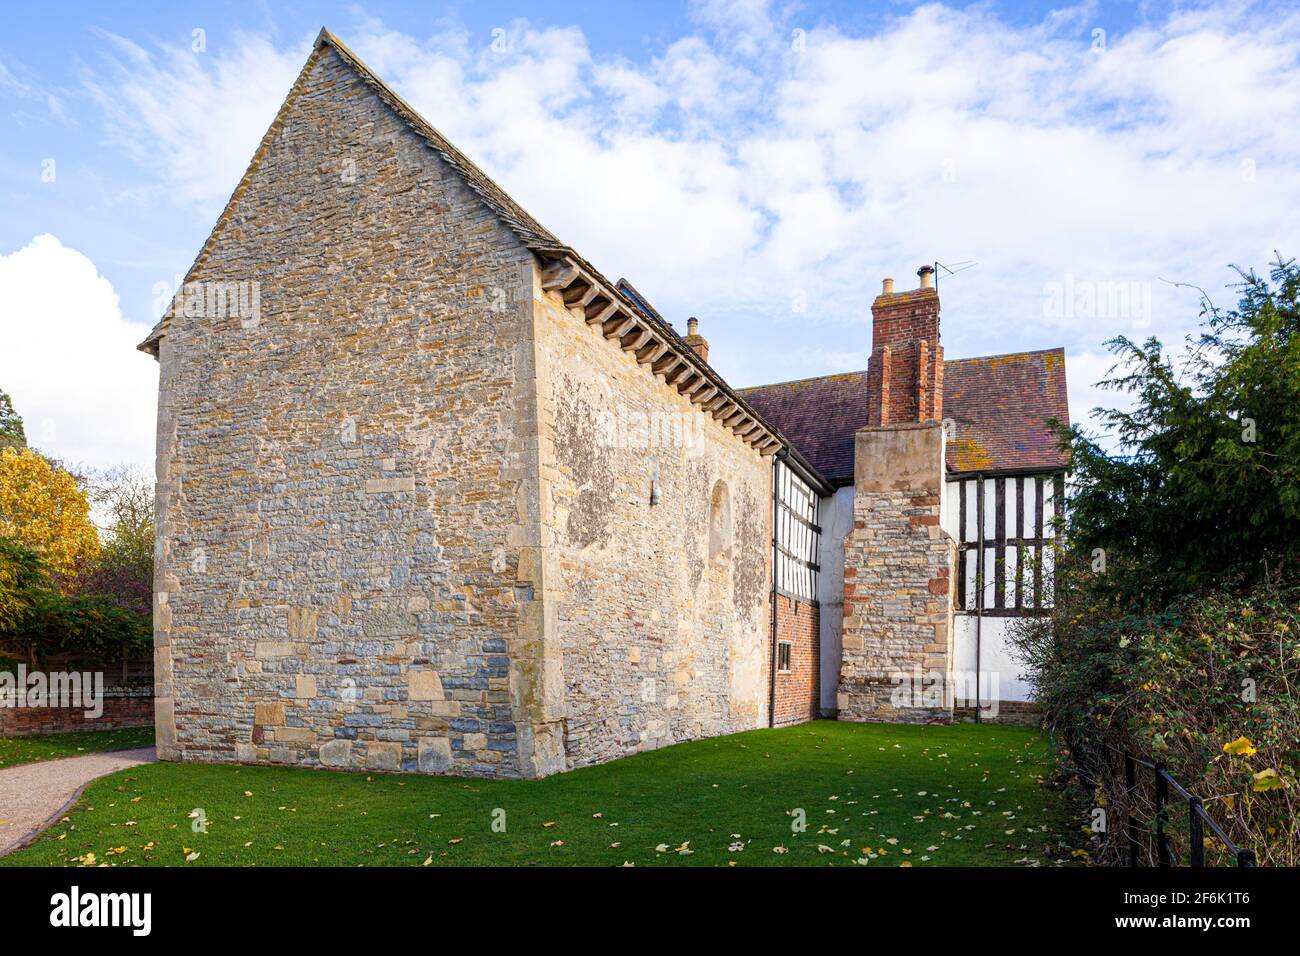 Odda's Chapel, one of the most complete surviving Saxon churches in England, built in 1056 by Earl Odda at Deerhurst, Gloucestershire UK Stock Photo